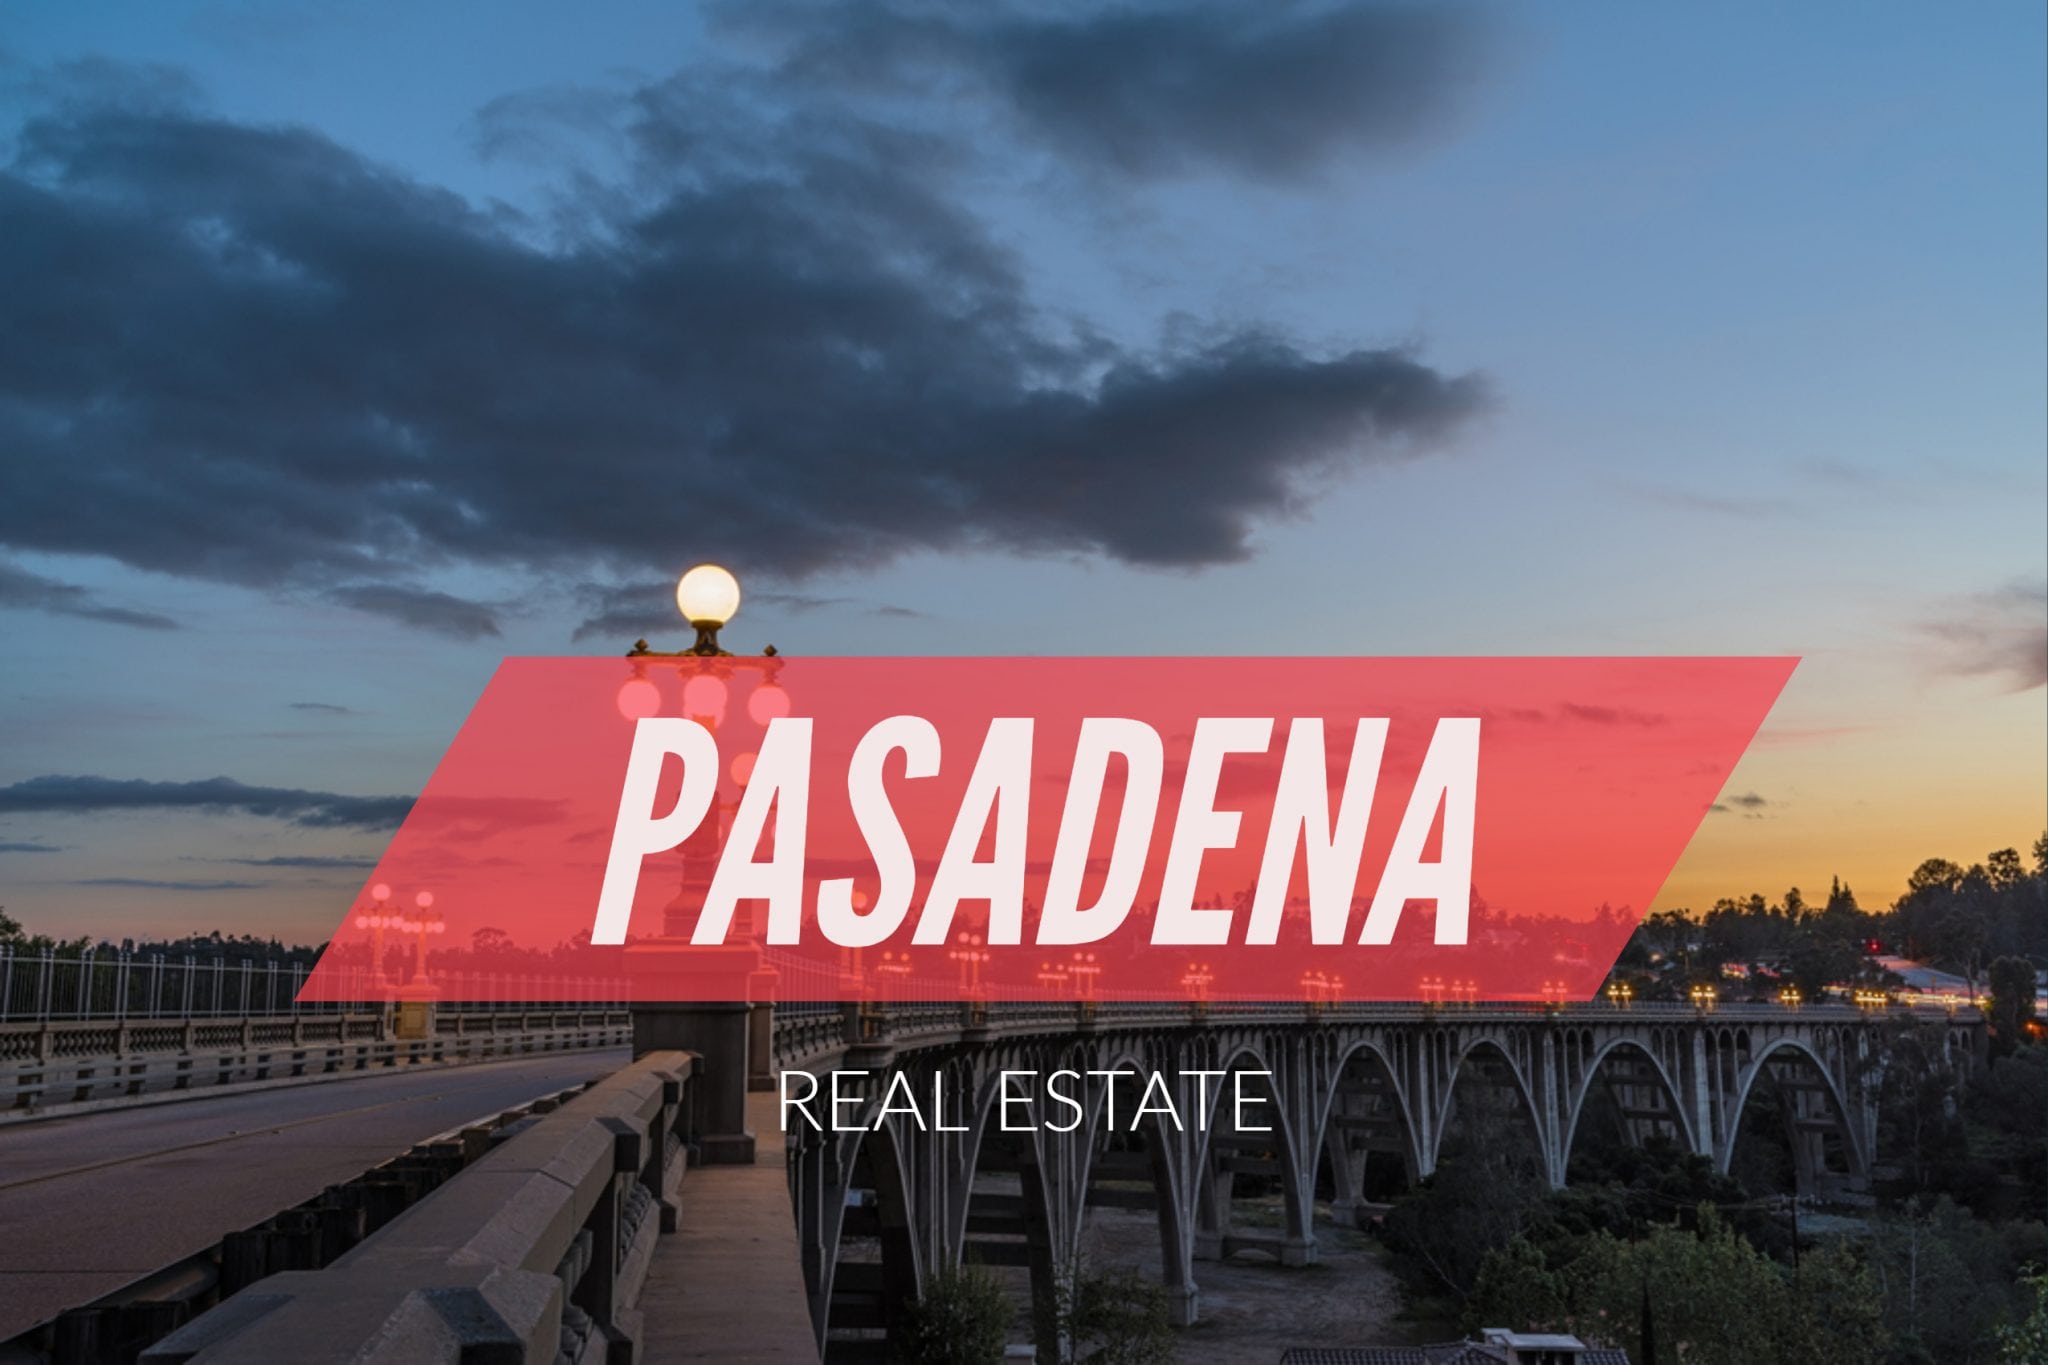 pasadena-real-estate-pasadena-real-estate-agent-pasadena-realtor-pasadena real estate agent pasadena real estate office pasadena real estate company best real estate company to work for los angeles which real estate company has the best training for new agents best pasadena realtor pasadena homes for sale pasadena real estate market